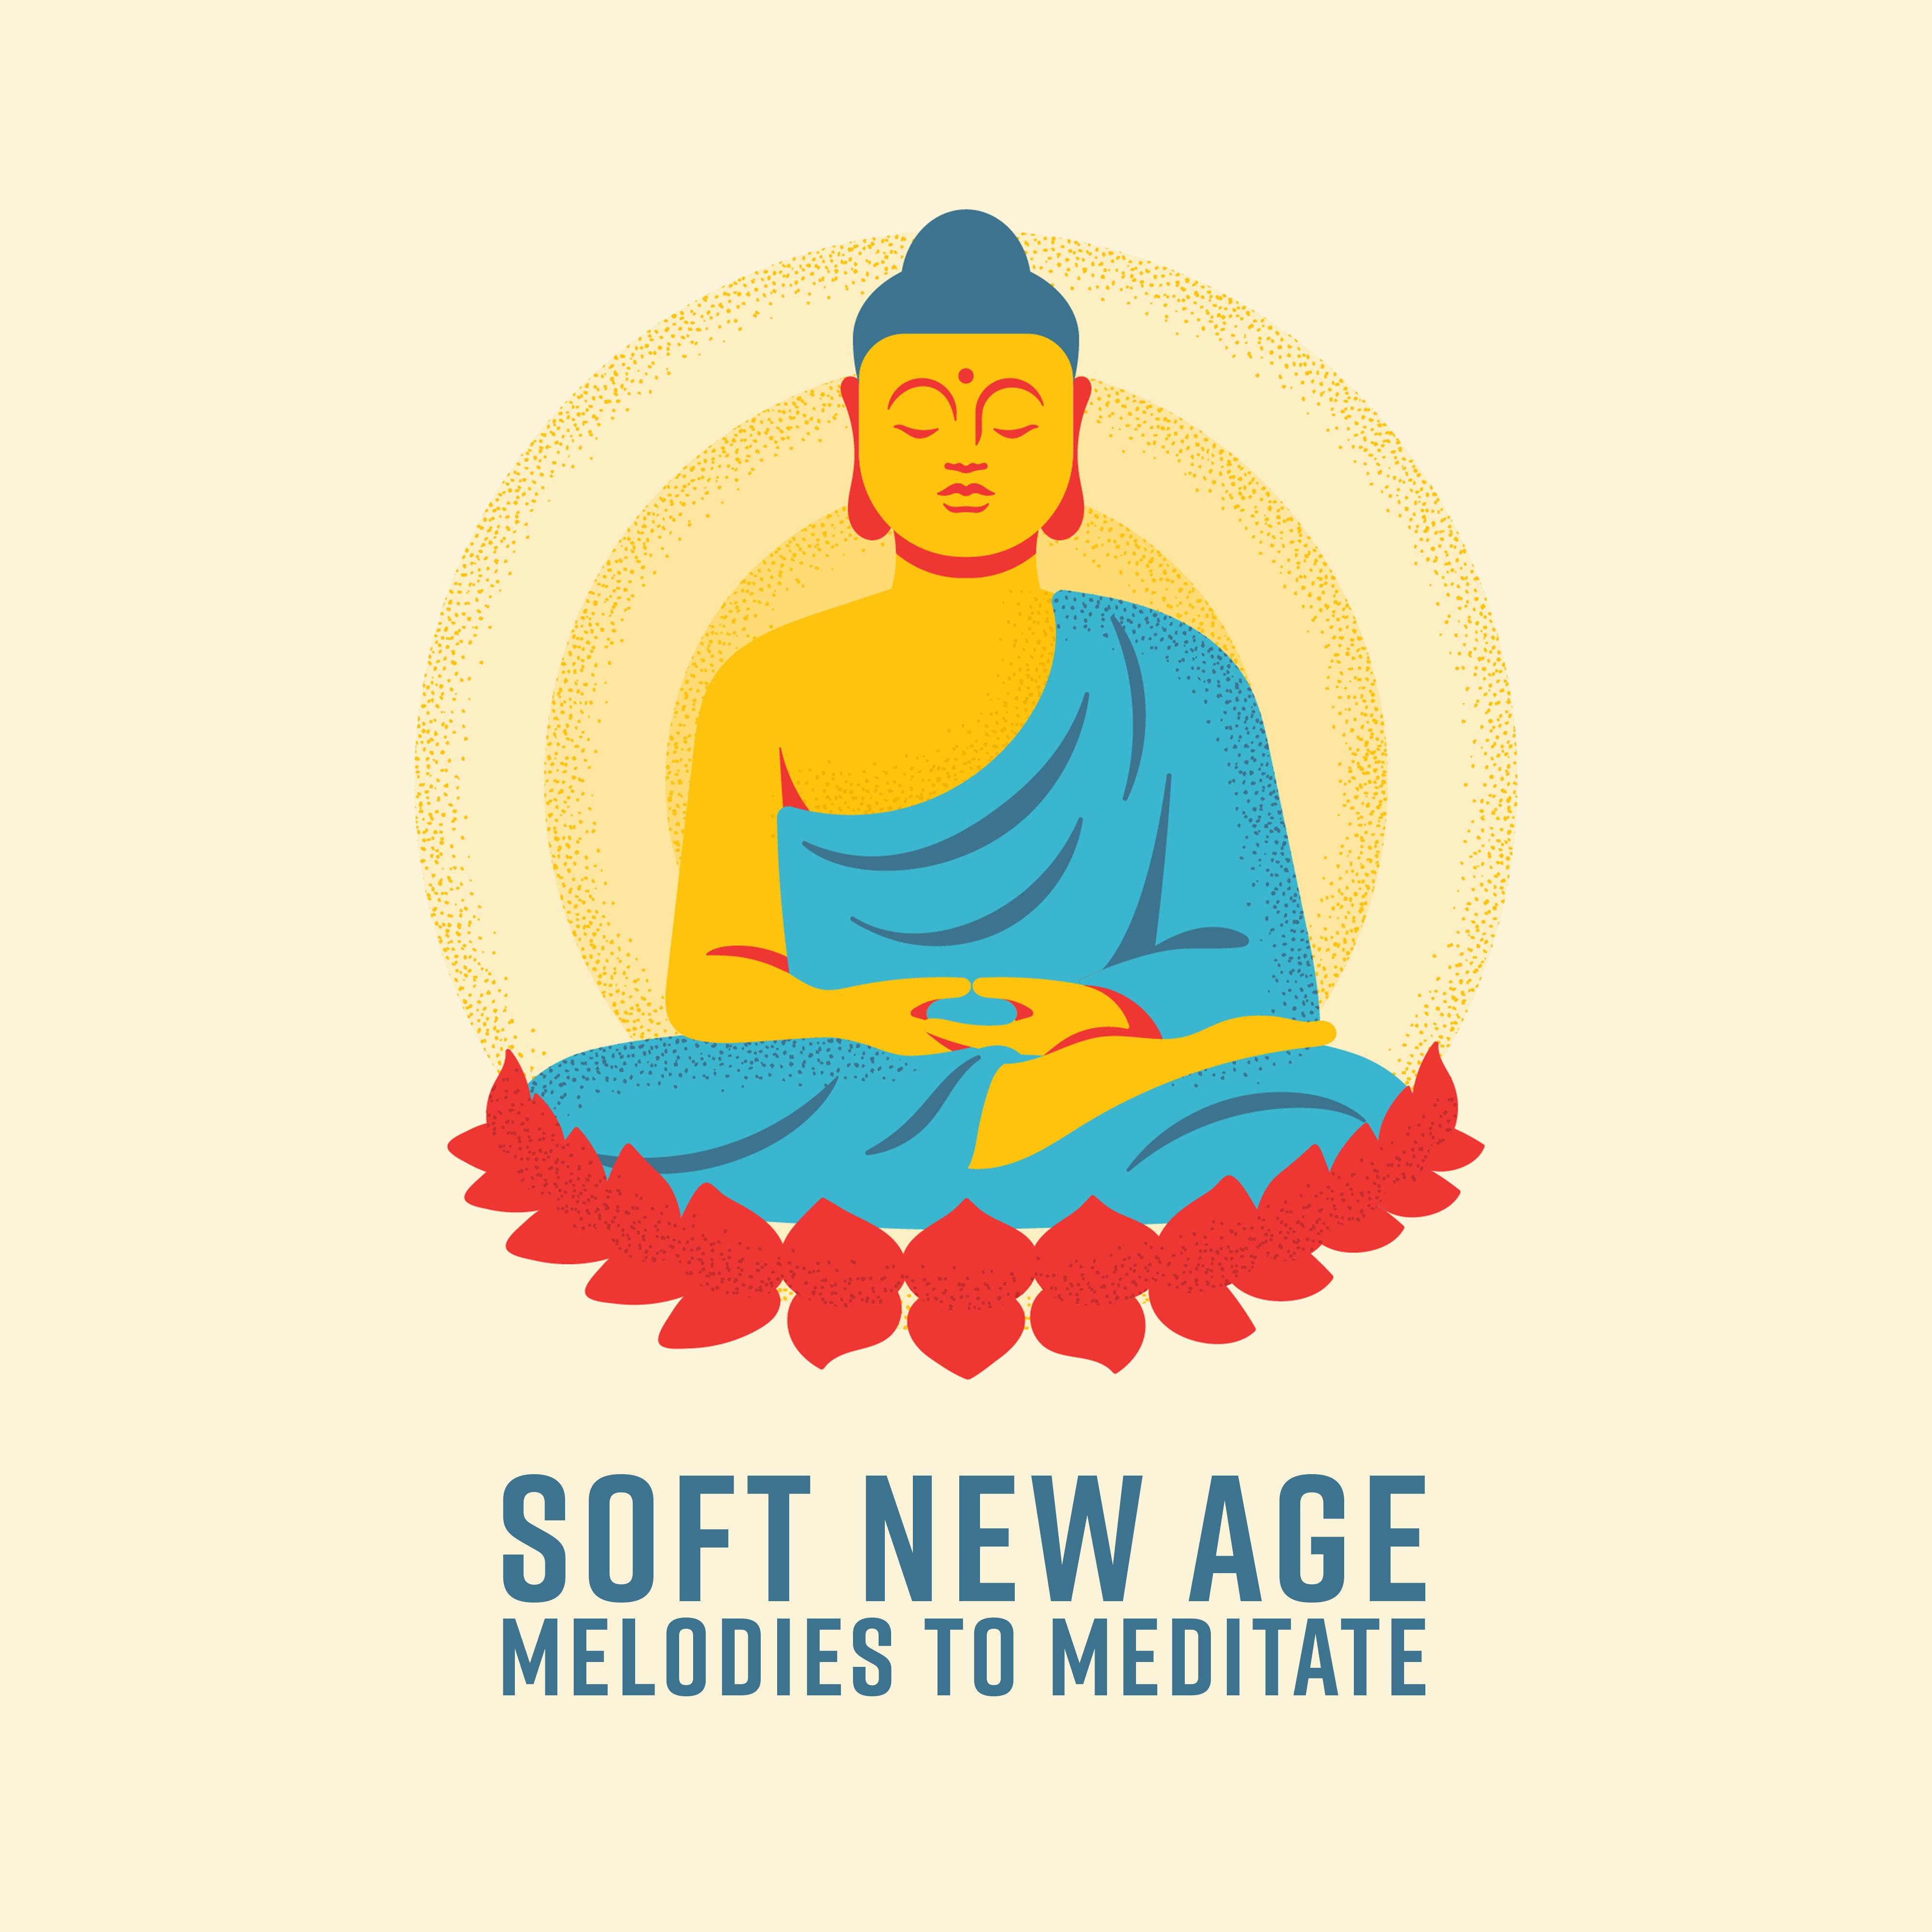 Soft New Age Melodies to Meditate